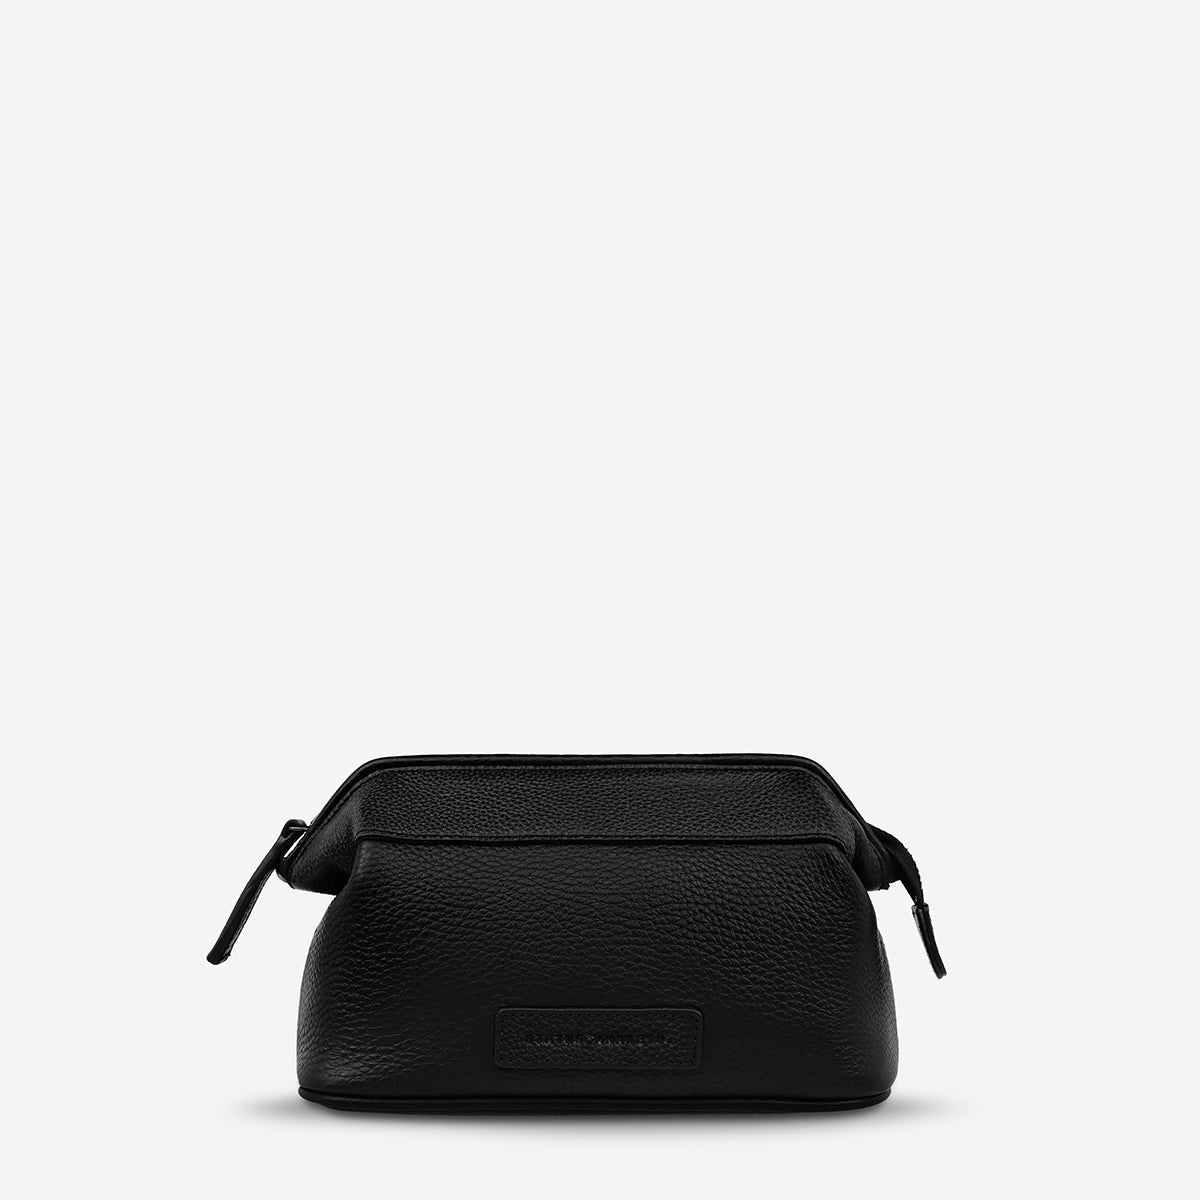 Status Anxiety Thinking of a Place Leather Toiletry Bag Black